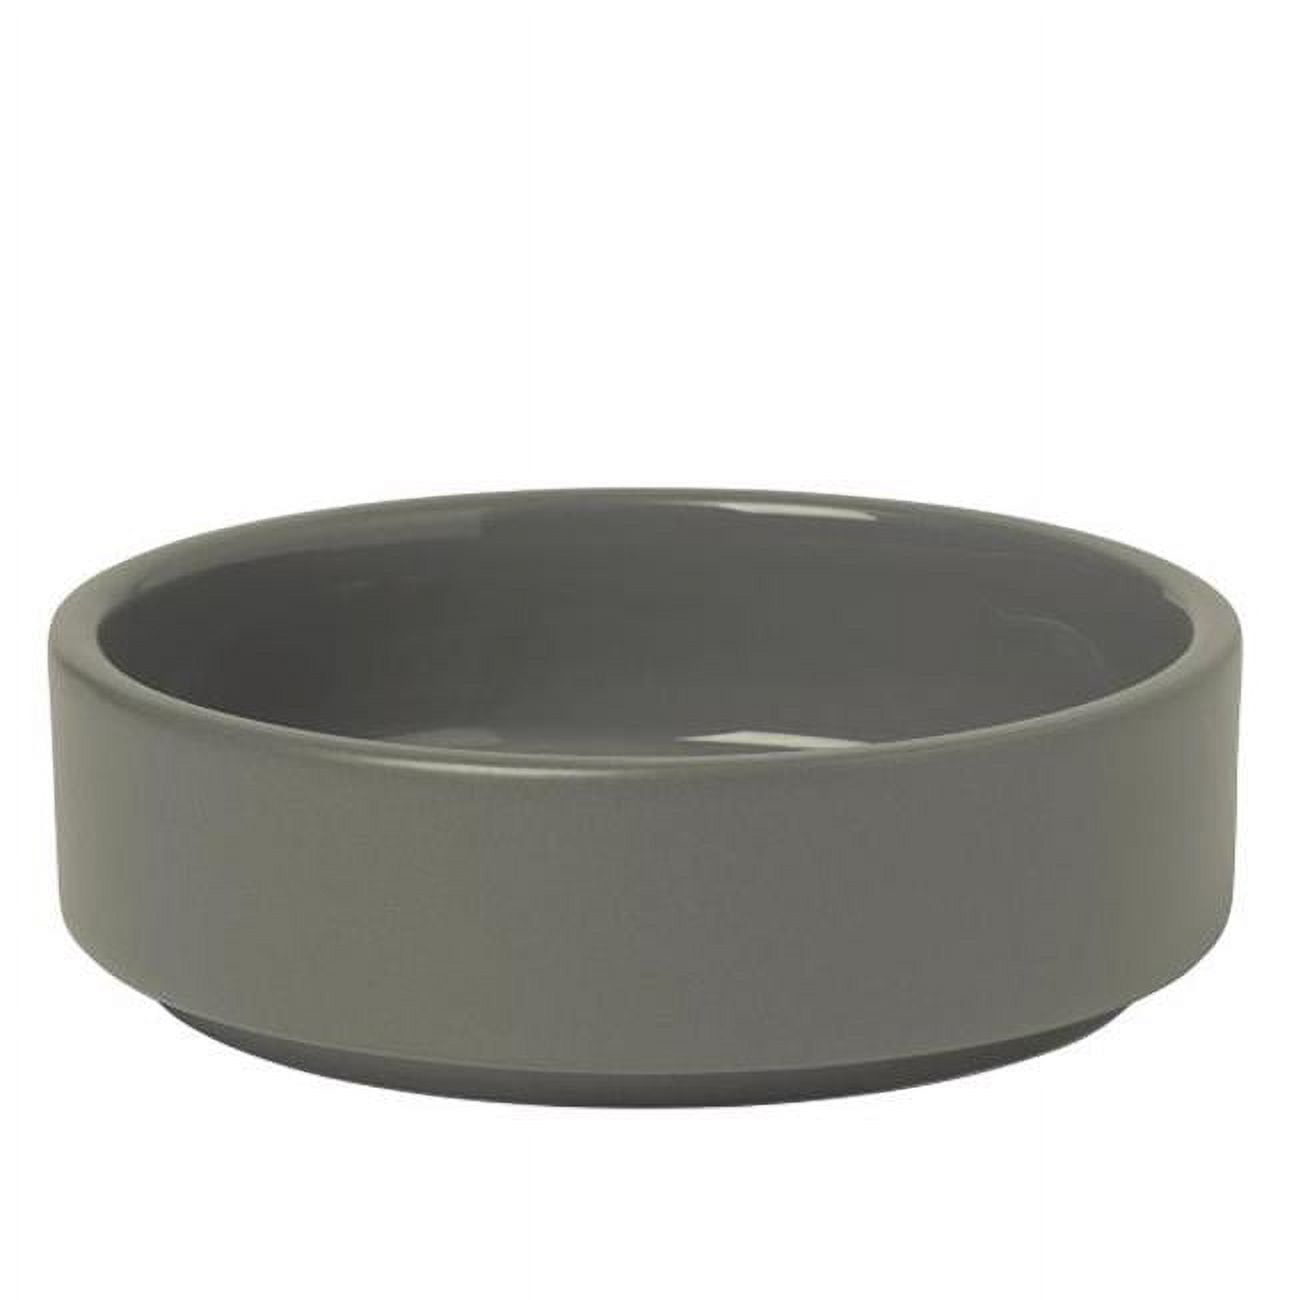 Picture of Blomus 63987.4 Pilar Bowl, Pewter - Extra Small - Set of 4